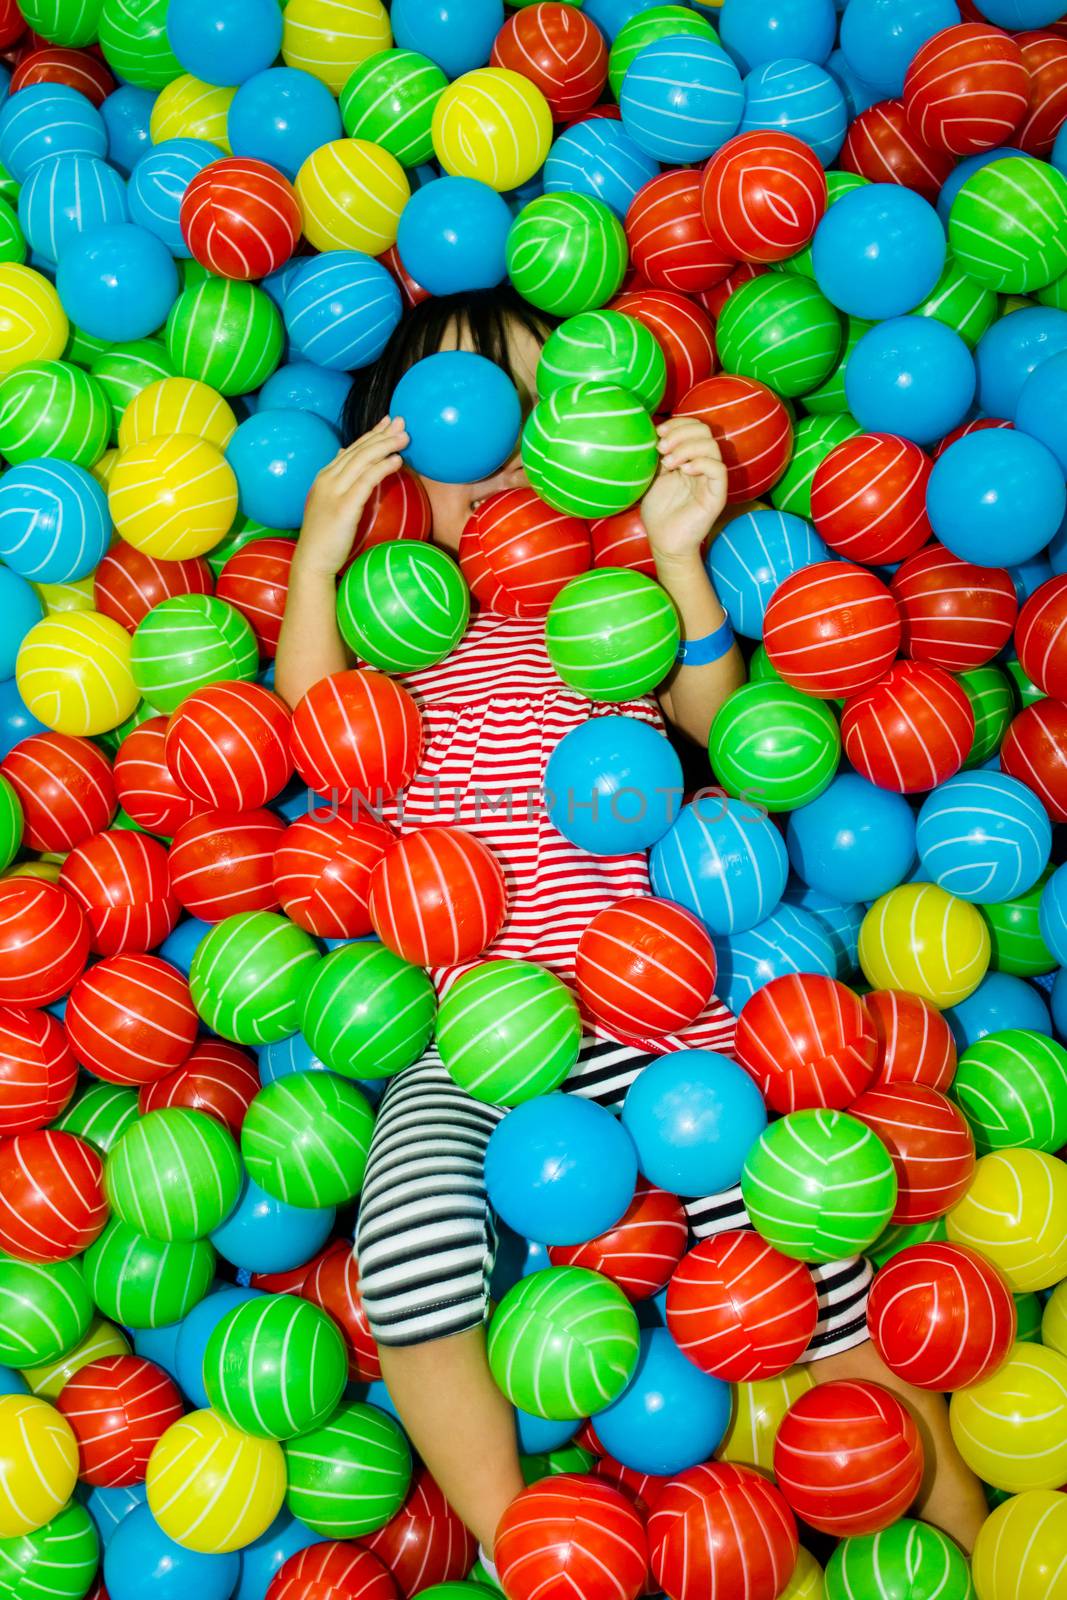 Asian Chinese Girl In Ball Pool by kiankhoon